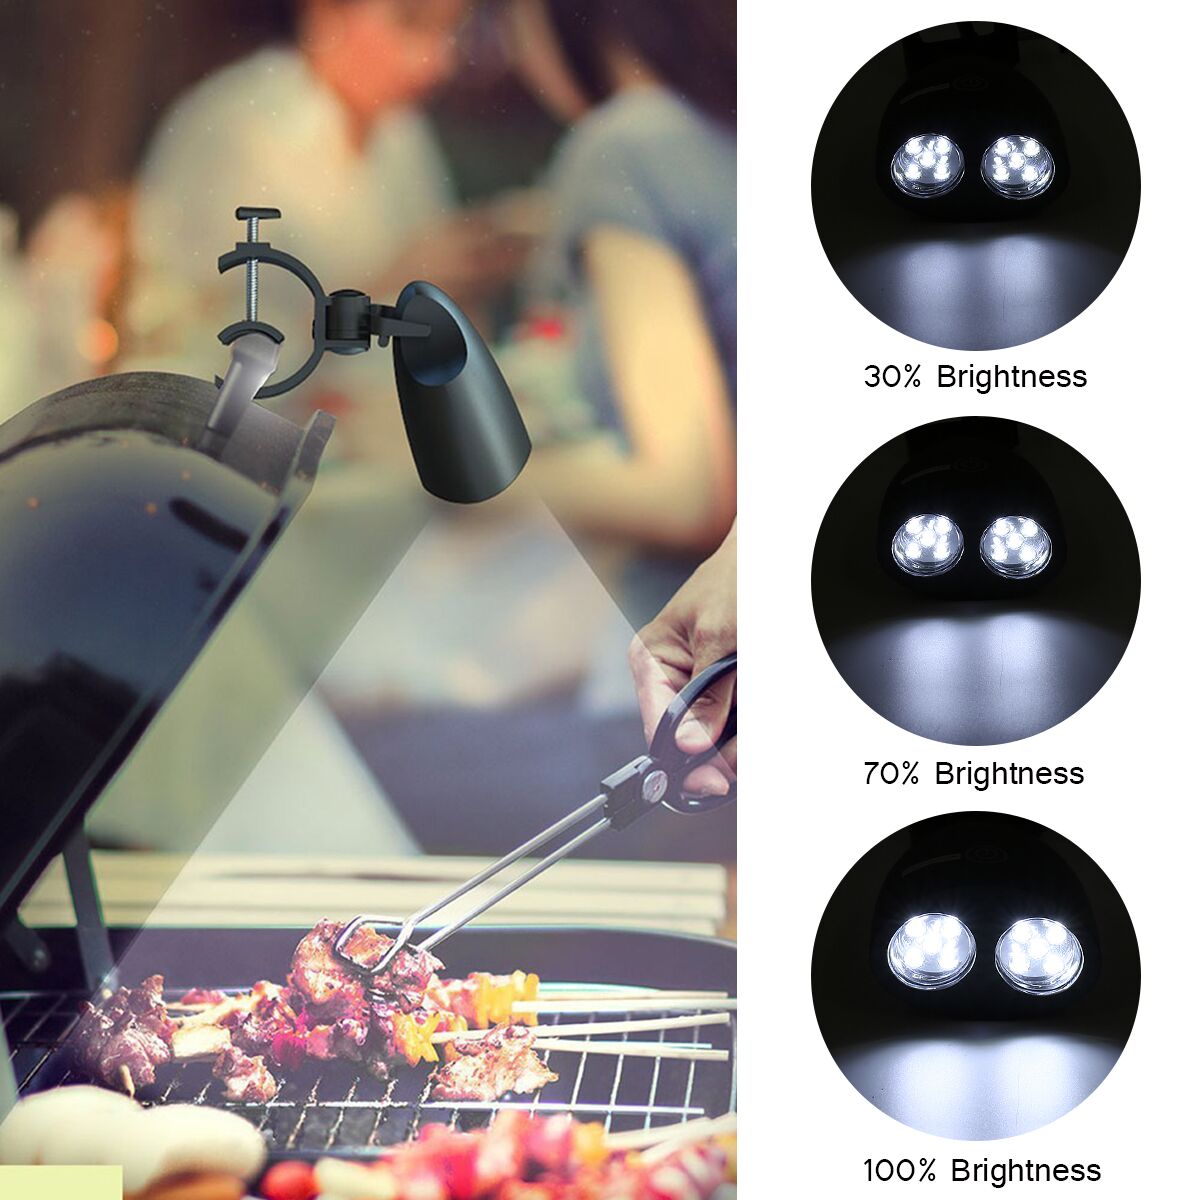 10-LED-BBQ-Grill-Barbecue-Sensor-Light-Outdoor-Waterproof-Handle-Mount-Clip-Camp-Lamp-DC-45V-1257898-9